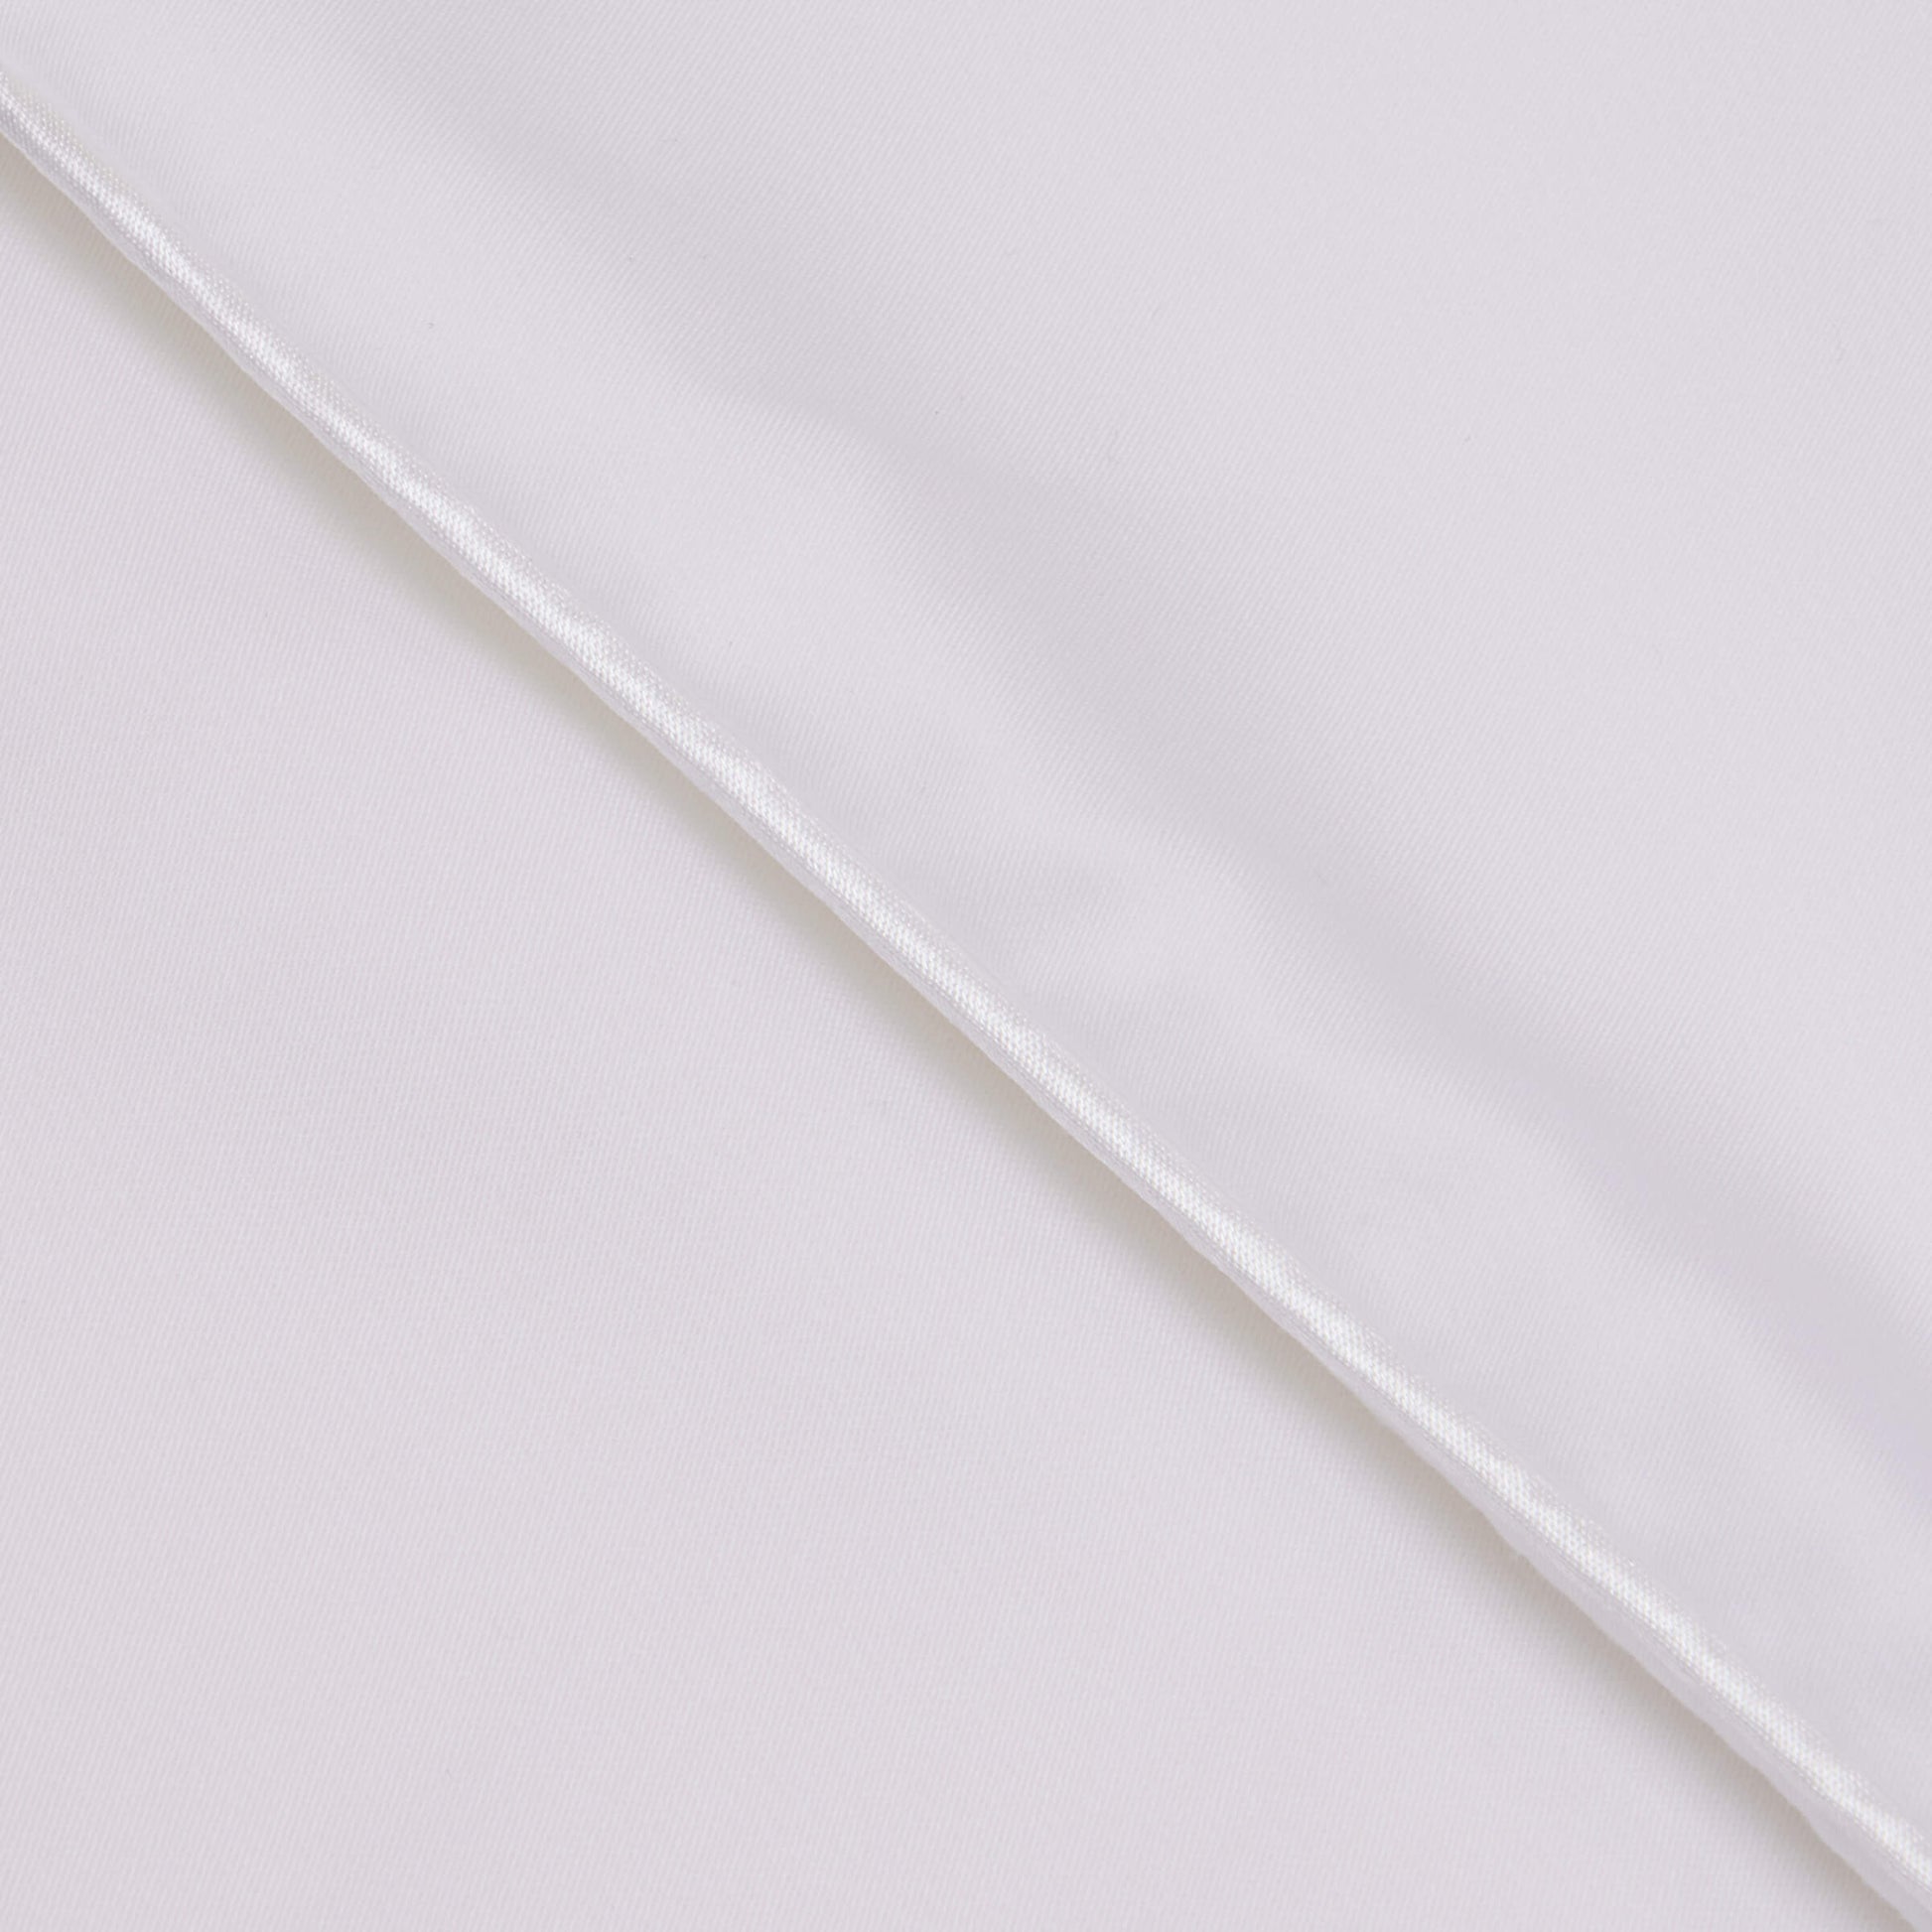 Detailed view of the fabric piping on the Slumber Cloud Performance Duvet Cover with temperature regulation technology and Tencel